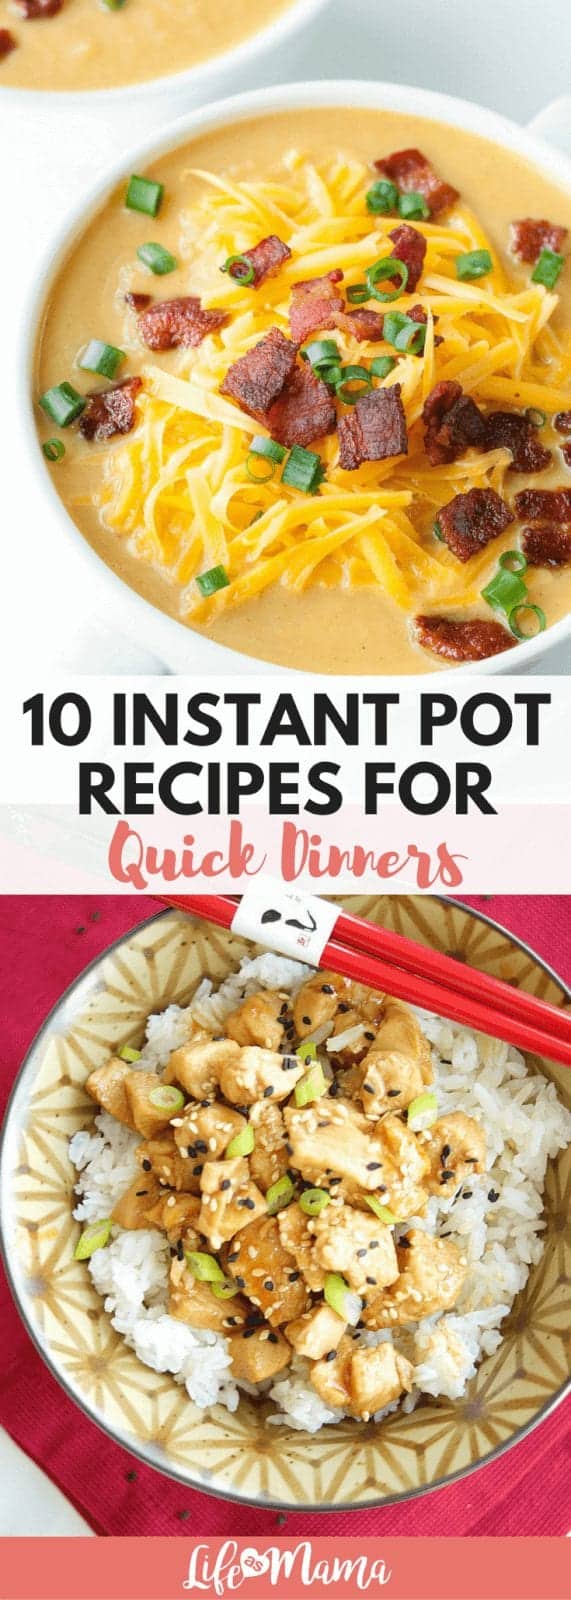 instant pot dinners